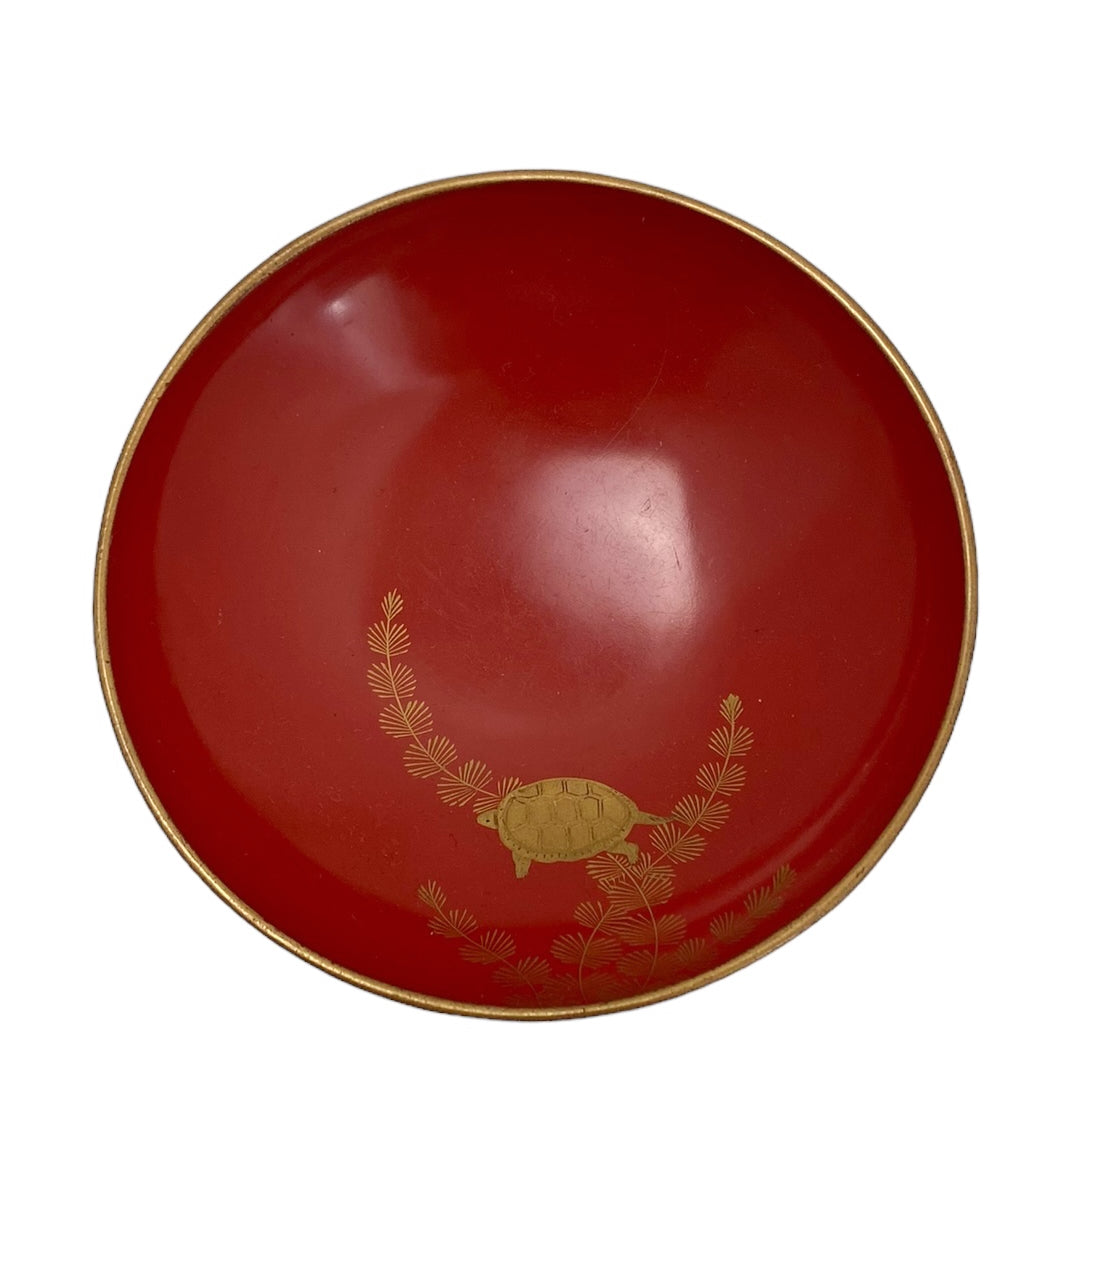 Antique lacquered bowl with lid depicting a happy turtle.